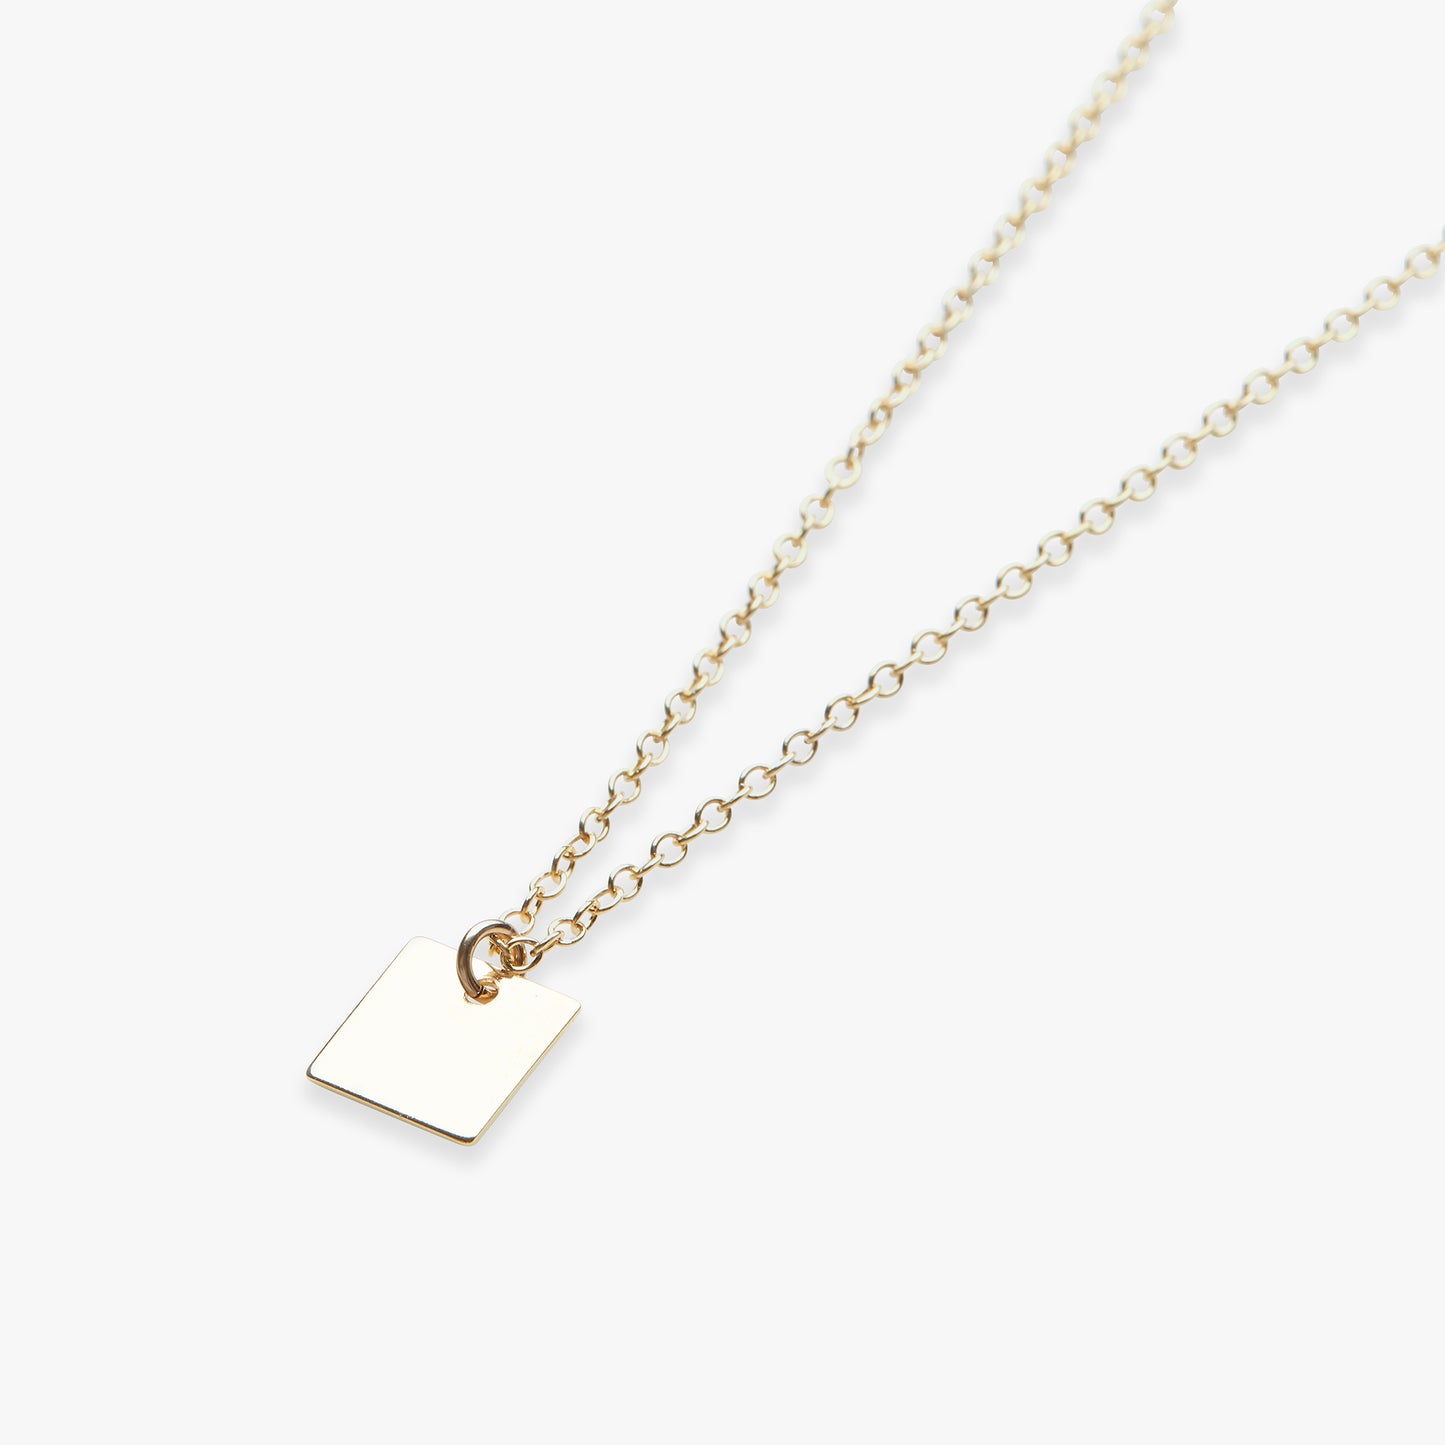 Square pendant necklace gold filled